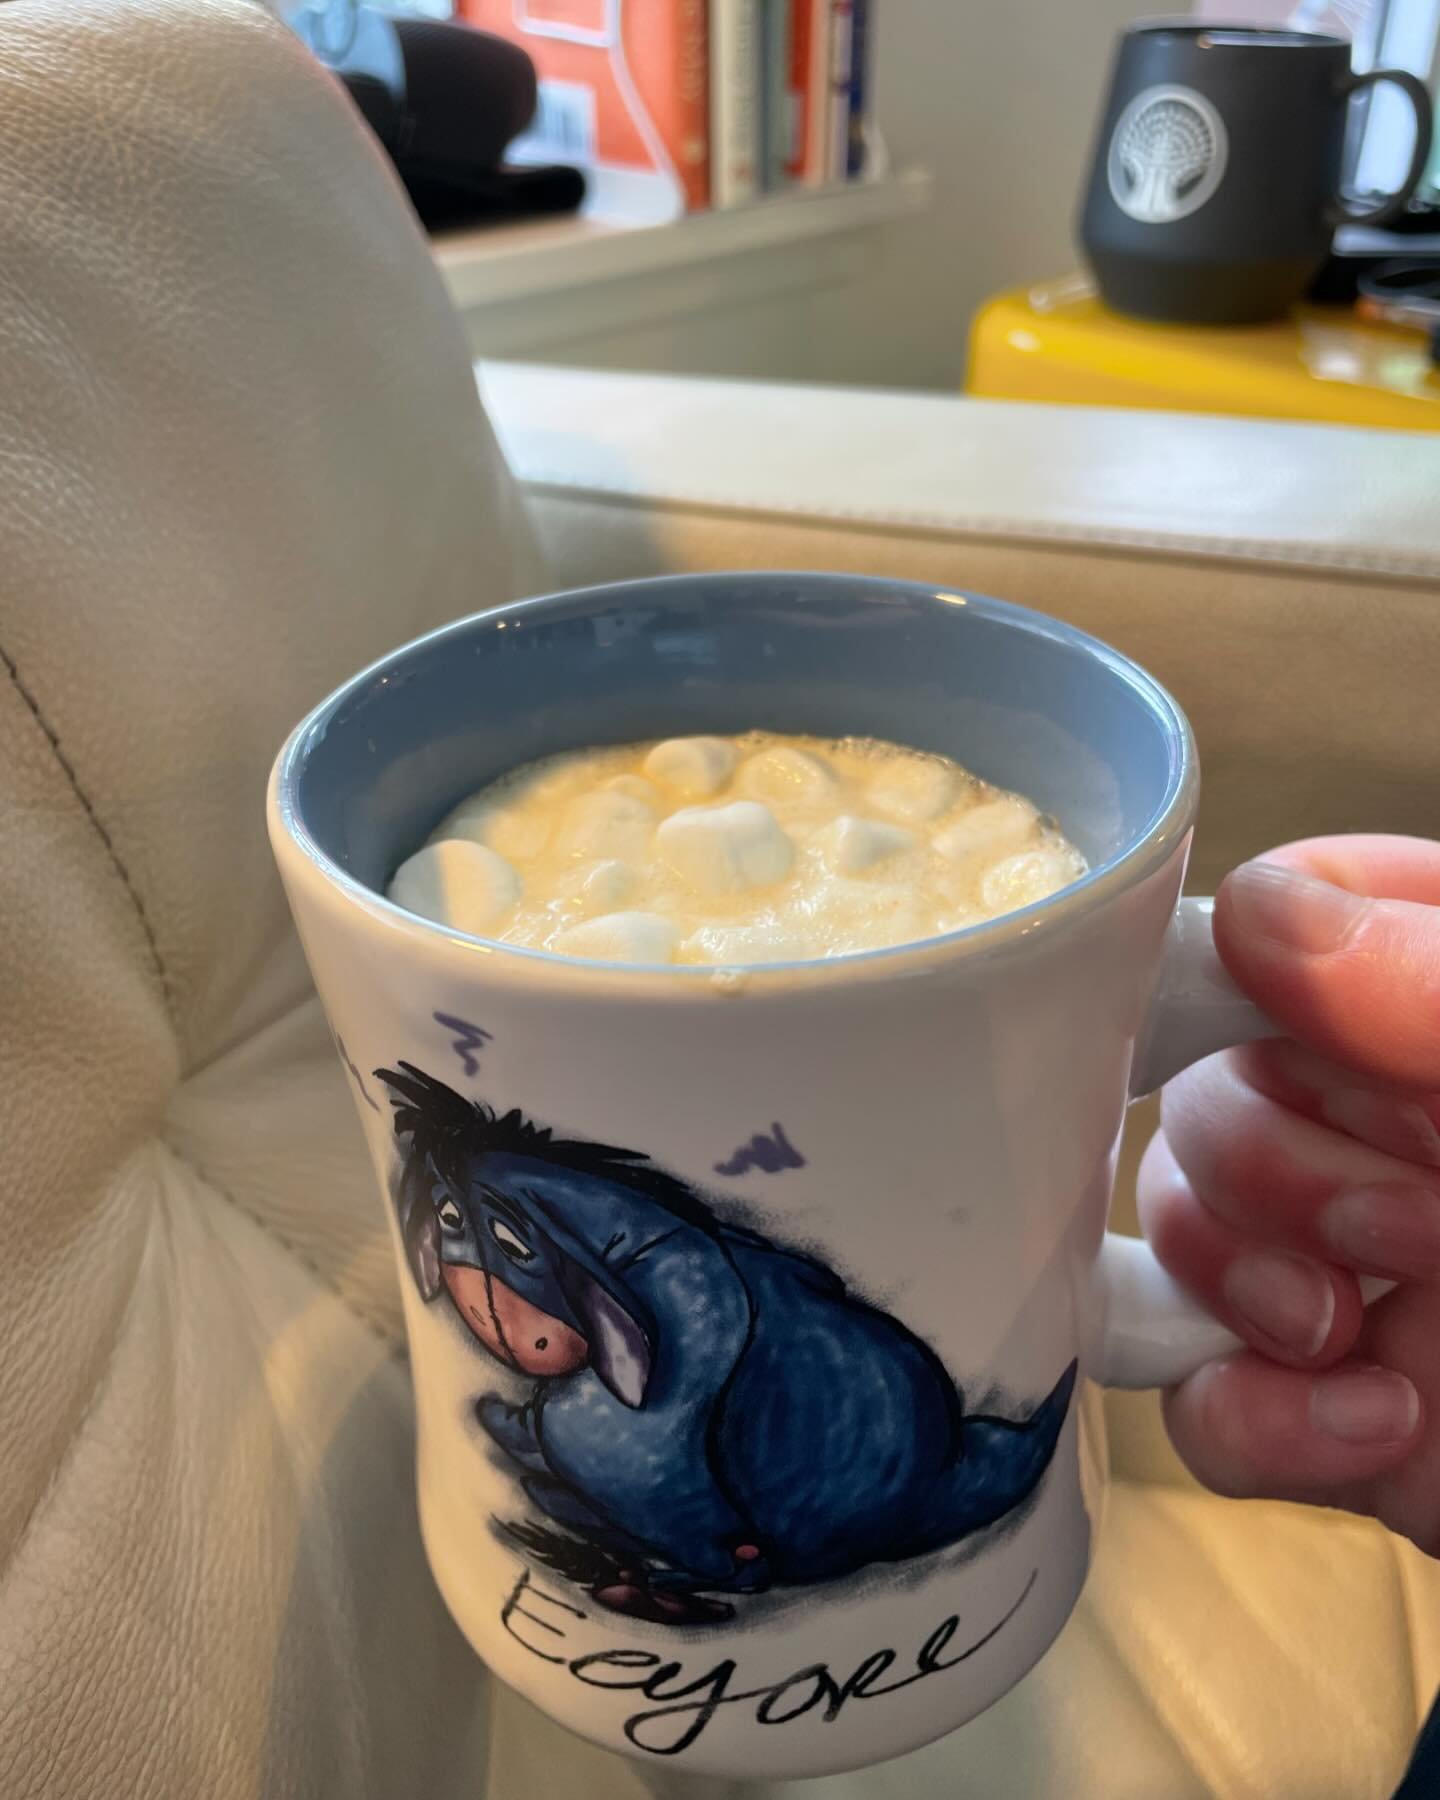 Sitting down to a chai (with marshmallows) in a mug I&rsquo;ve owned since high school. The taste and smell of chai is something that puts me directly at ease and feeling cozy&mdash;a taste and scent I&rsquo;ve known since, well, high school.

This i